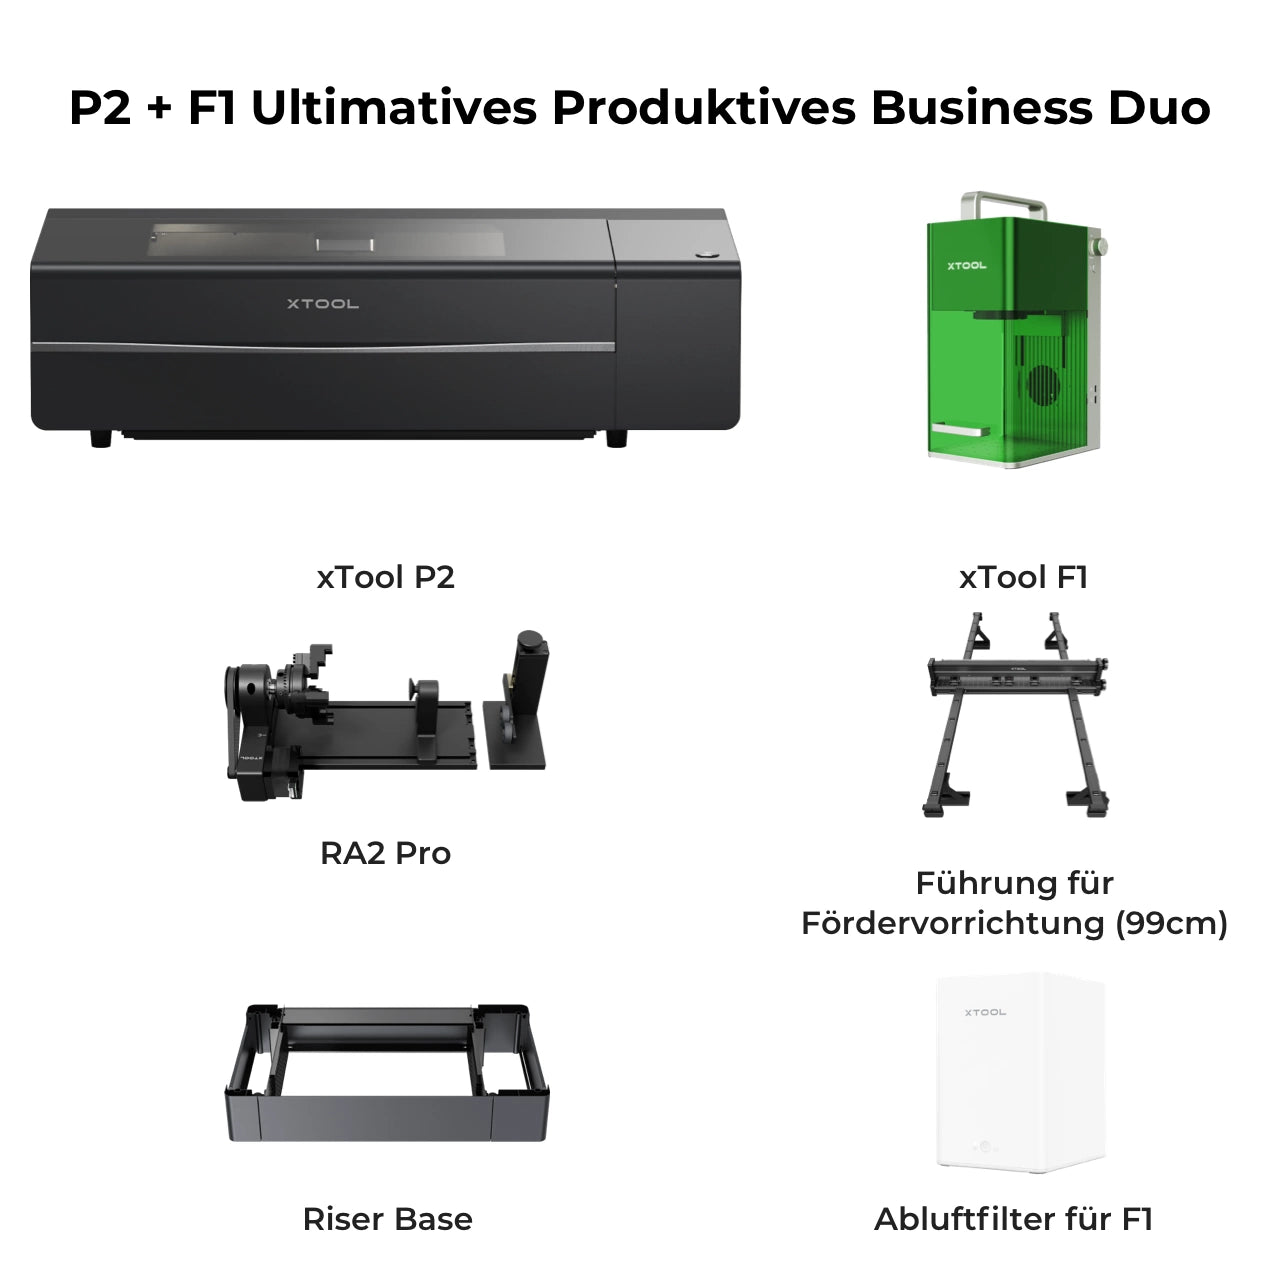 xTool P2 + F1 Ultimatives Produktives Business Duo